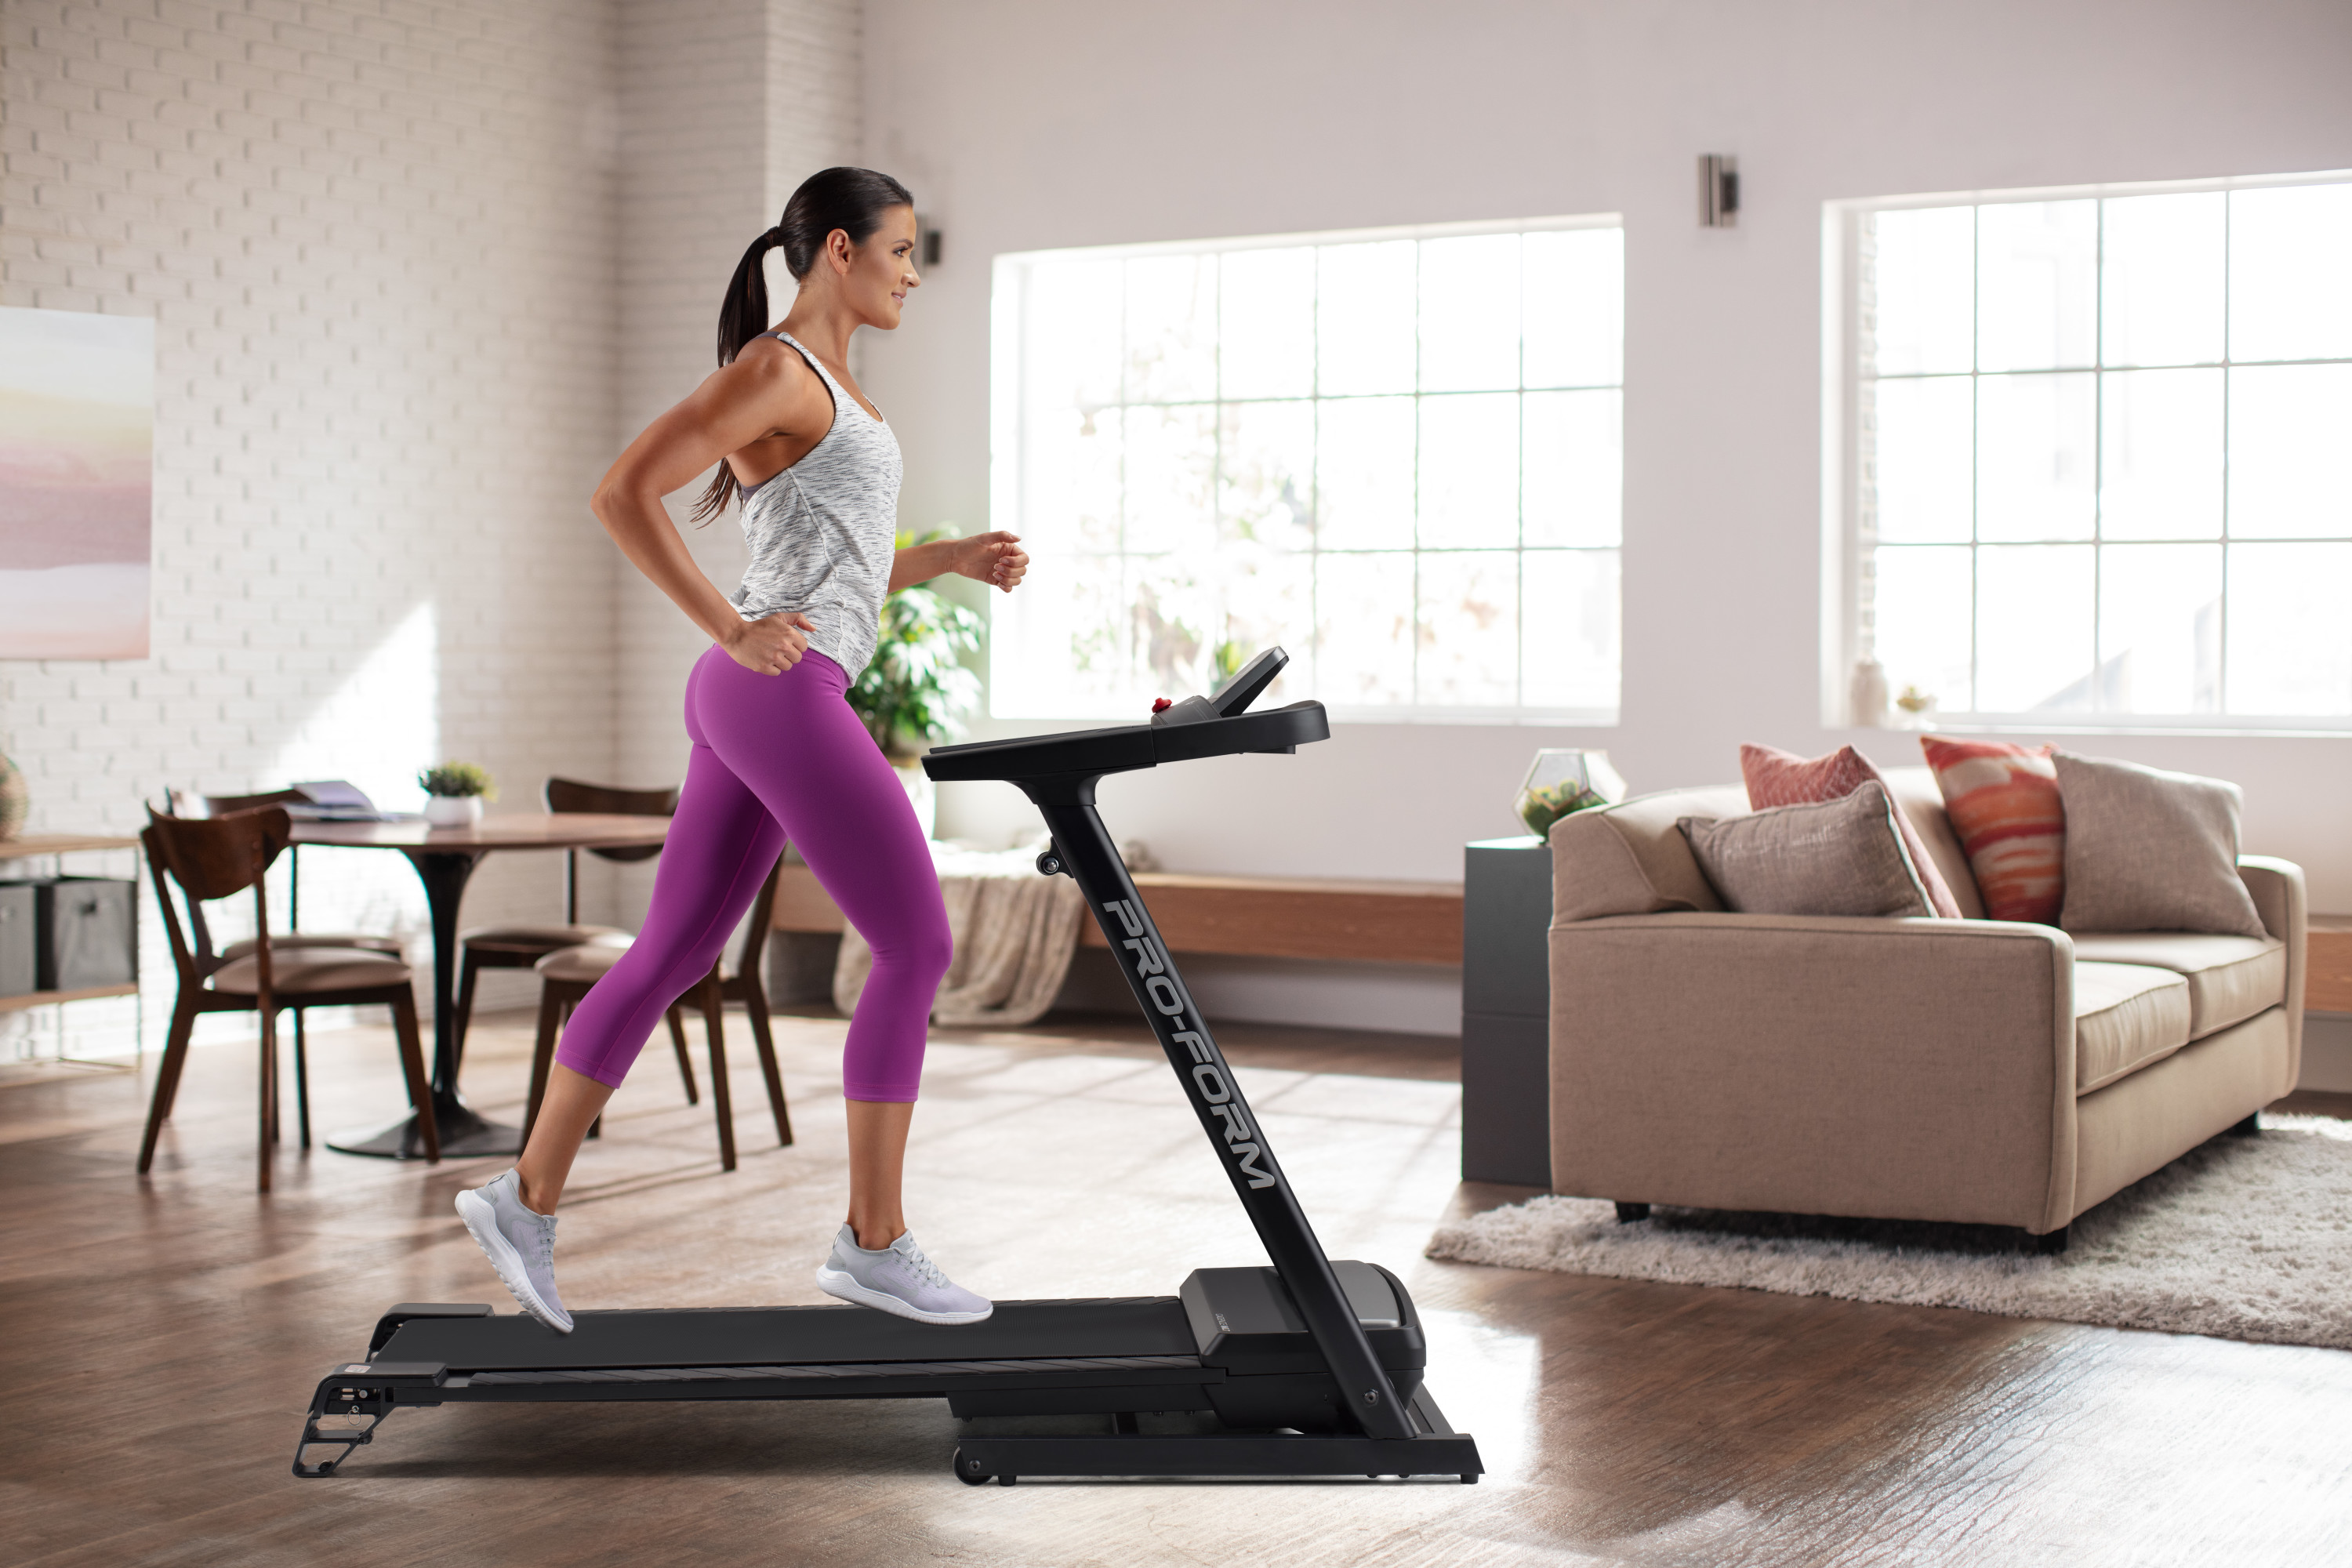 ProForm Cadence WLT Folding Treadmill with Reflex Deck for Walking and Jogging, iFit Bluetooth Enabled - image 31 of 31